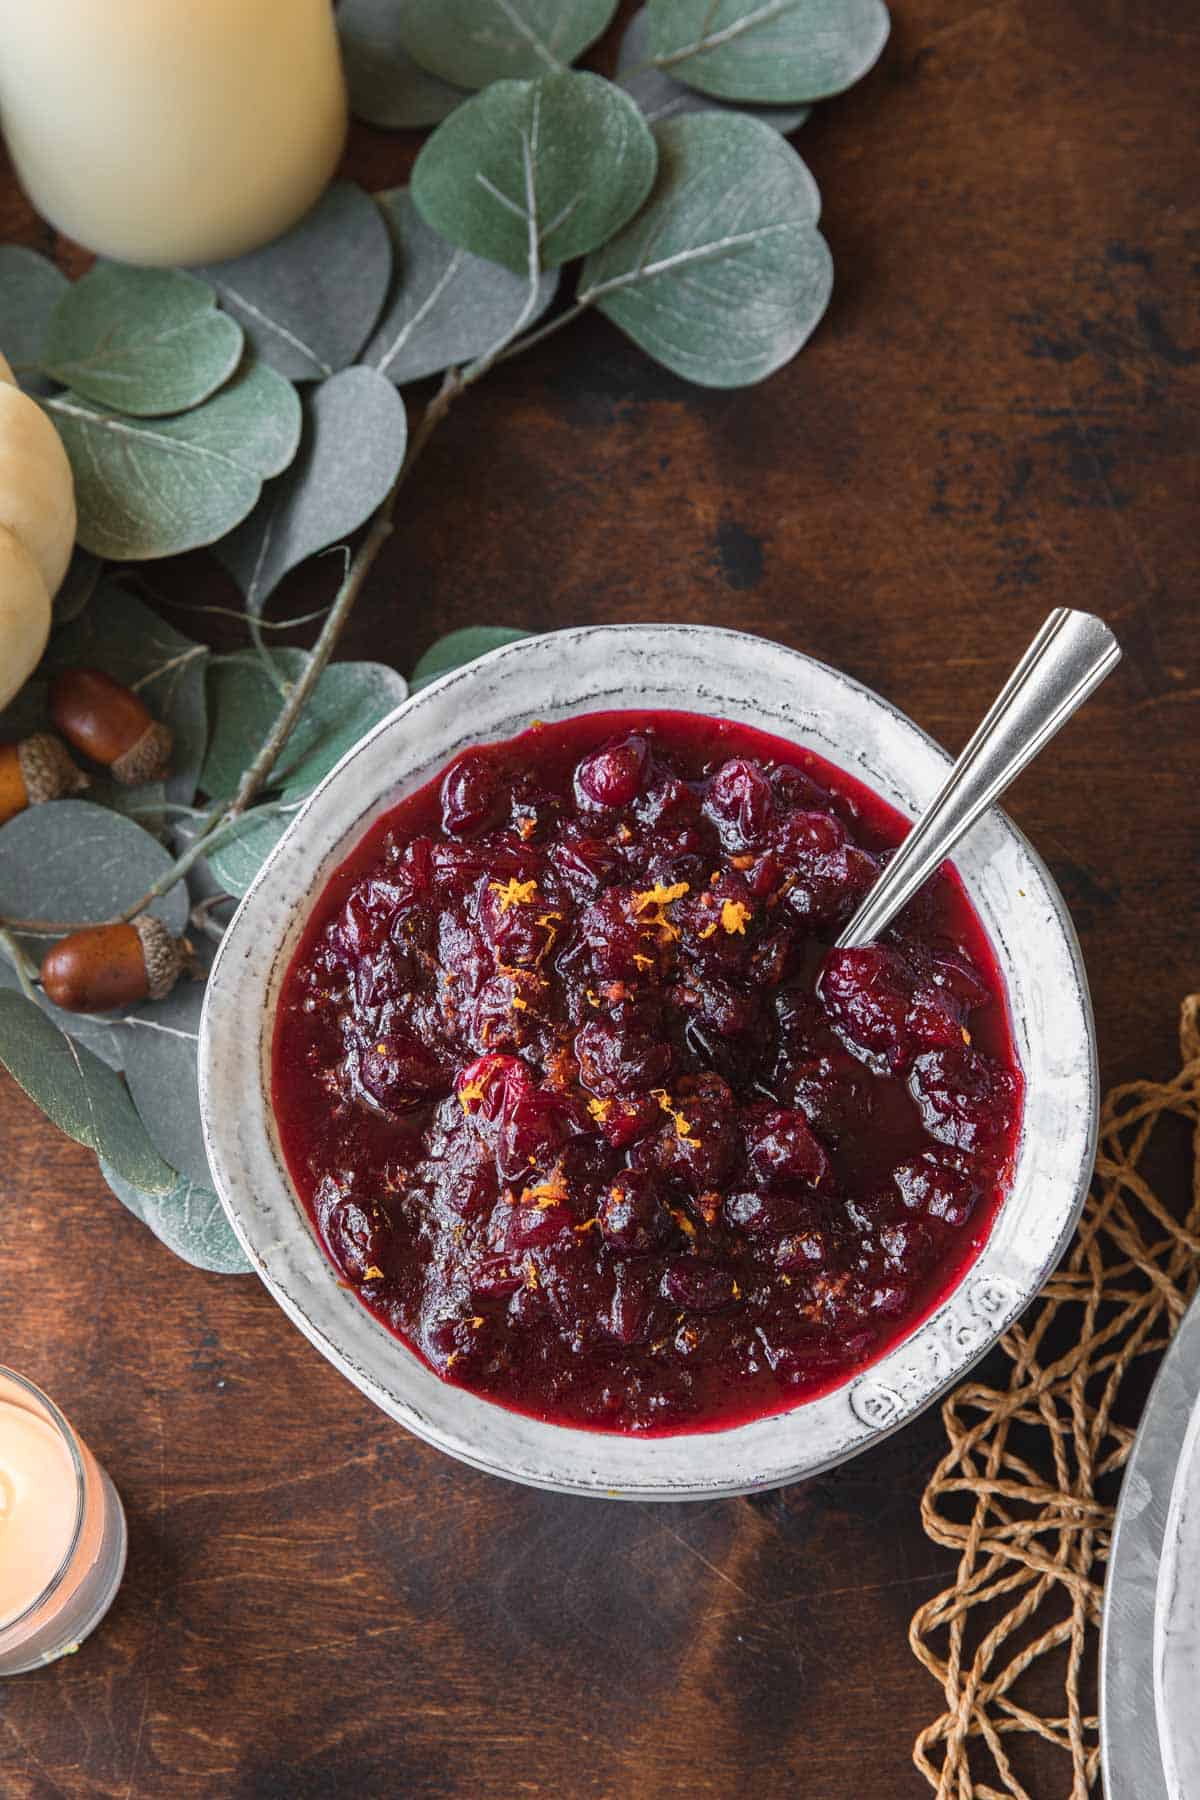 A bowl of cranberry sauce on a wooden table set for thanksgiving.